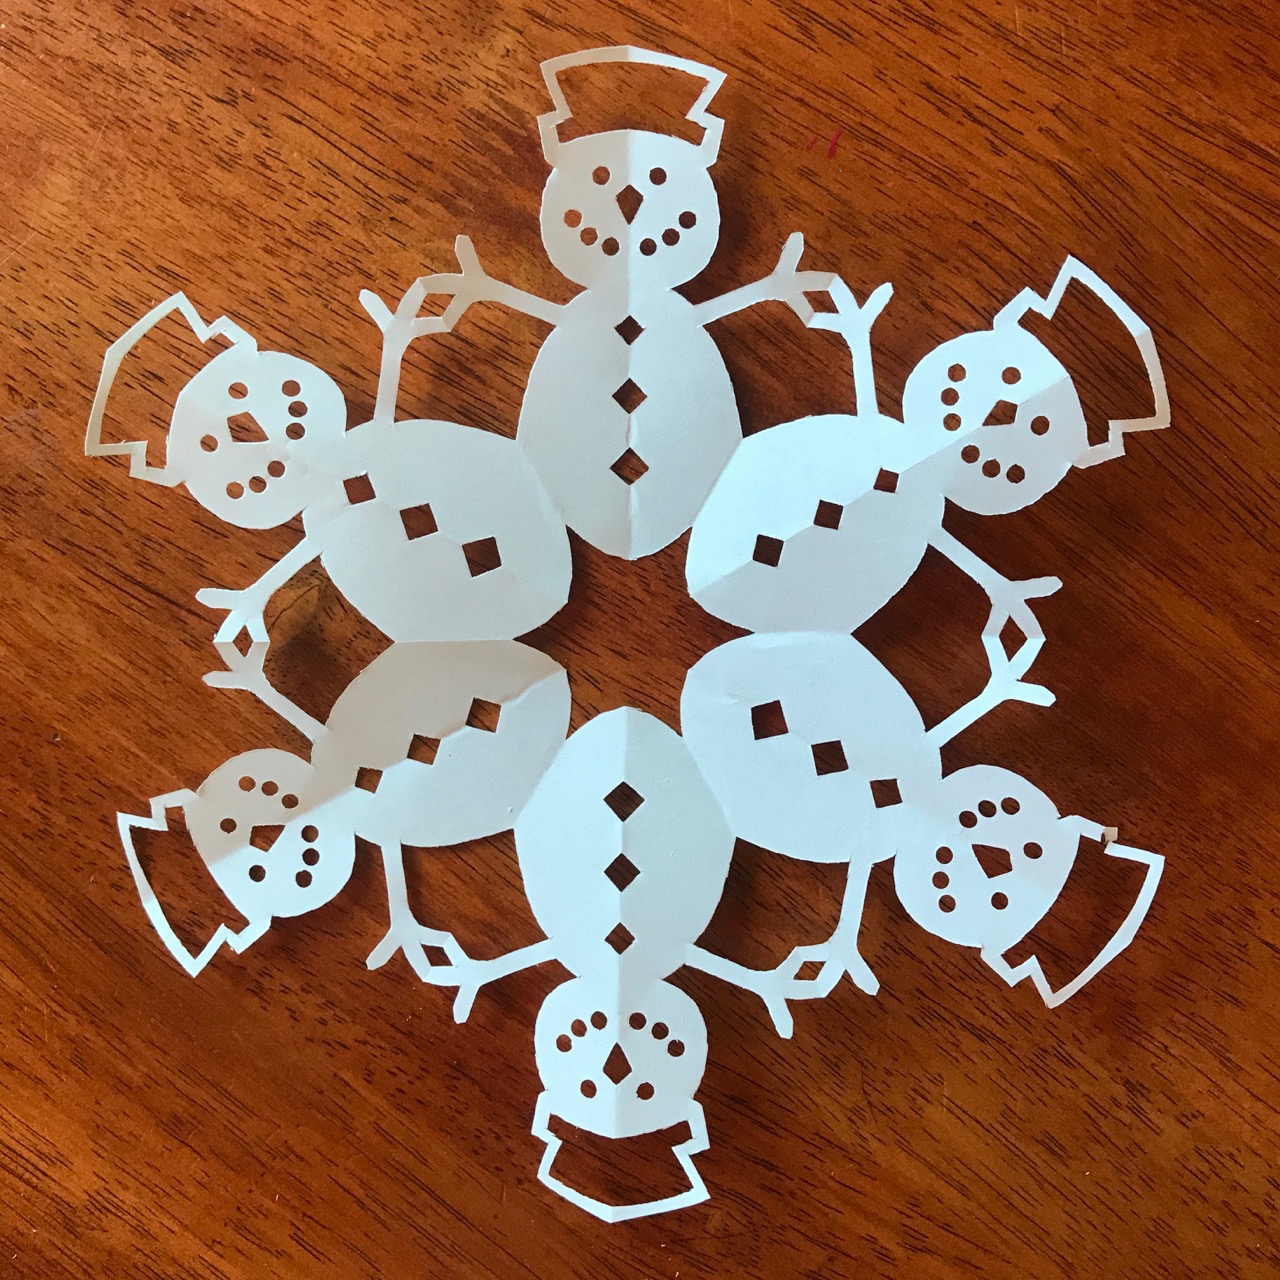 How to make a paper snowflake